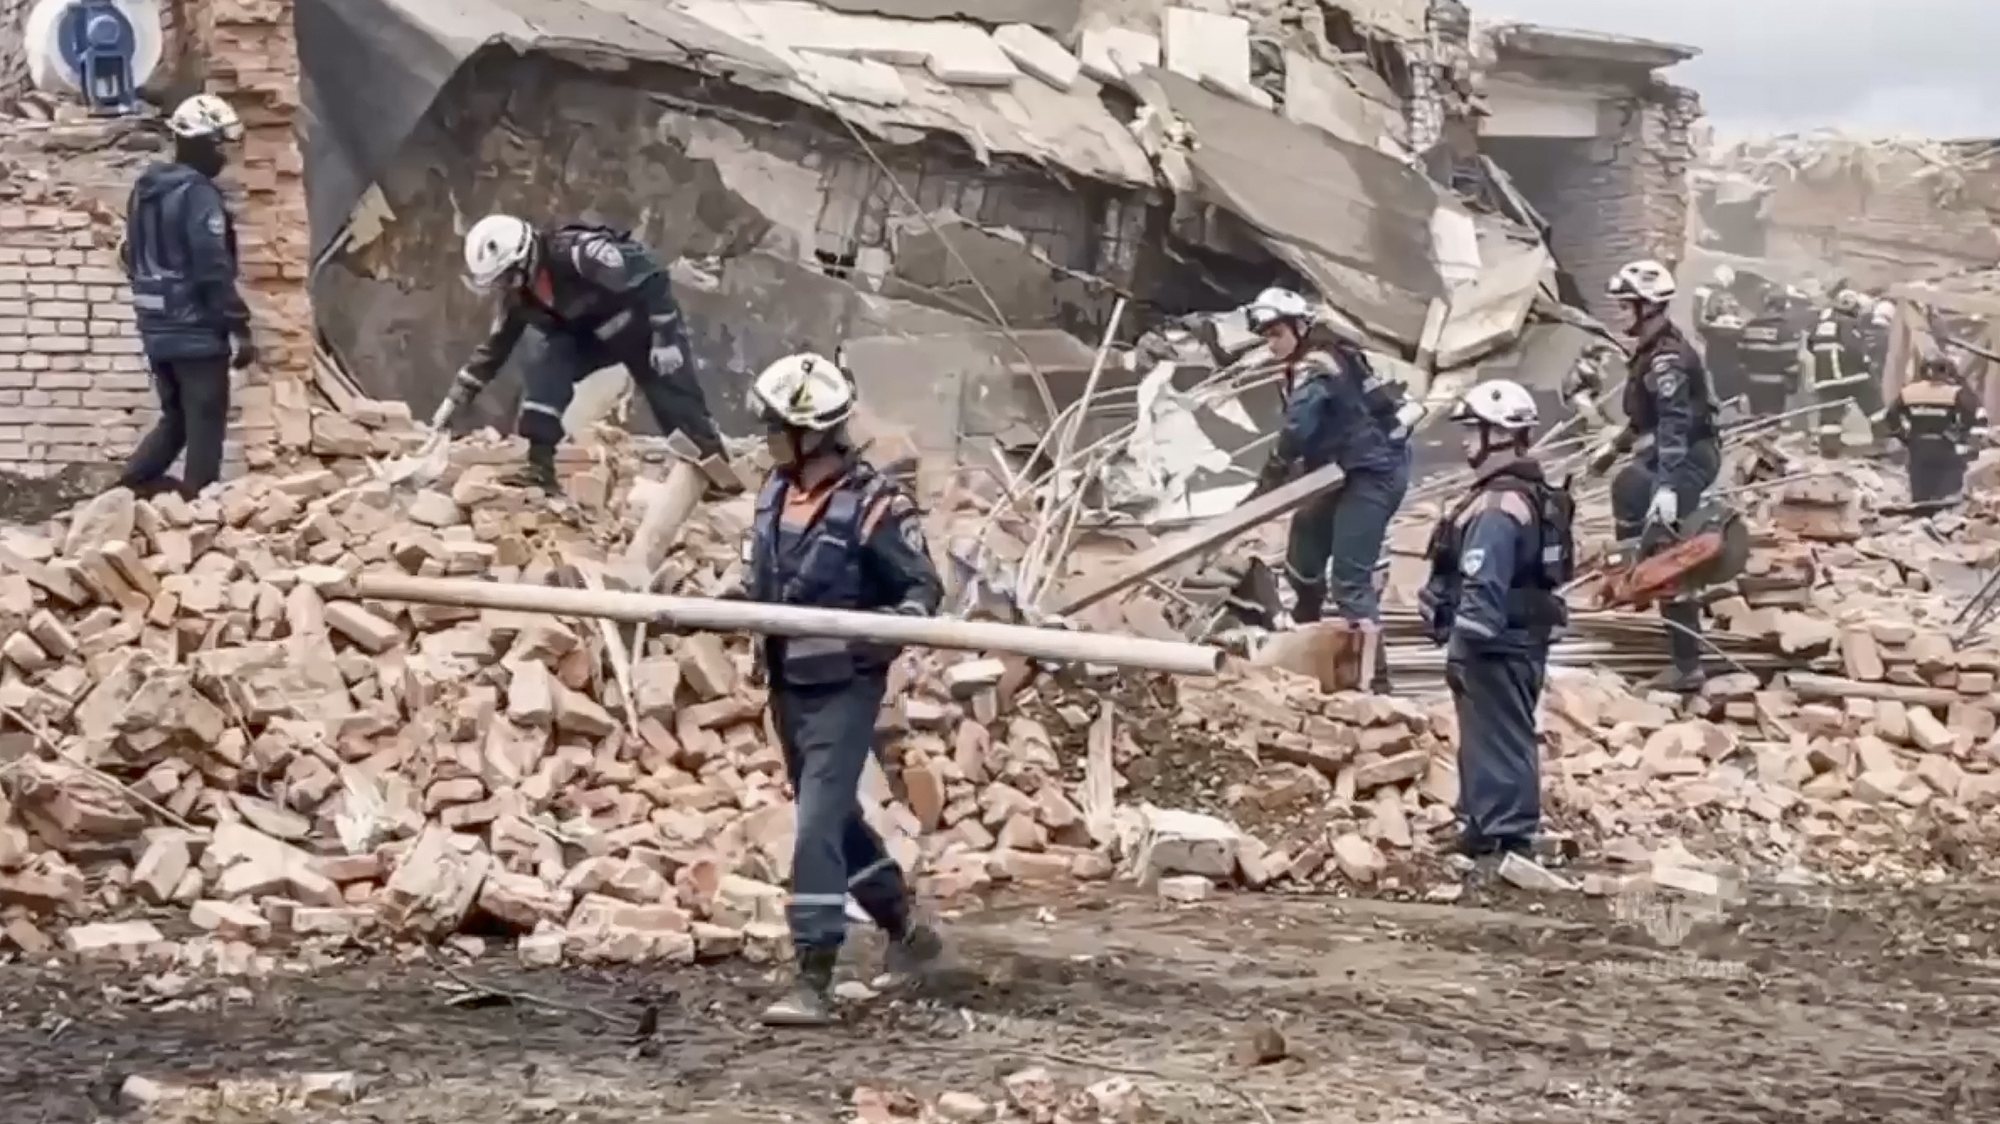 epa10792055 A photo taken from handout video provided  by the Russian Emergencies Ministry&#039;s press service shows emergency personnel working at the site of a blast at the Zagorsk Optical and Mechanical Plant in Sergiev Posad (about 68 kilometers from Moscow), Moscow Region, Russia, 09 August 2023. At least 45 people were injured and a complete evacuation of all buildings and workshops was announced at the plant. Violation of safety standards is the main reason for the explosion at the plant, said Olga Vradiy, a representative of the regional head of the investigative committee. &#039;The incident happened at 10:40 in a metal hangar of 40x40 meters. This is a pyrotechnics warehouse, which was rented by a private company on the territory of the Zagorsk Optical and Mechanical Plant,&#039; the Moscow region governor Andrey Vorobyov added.  EPA/RUSSIAN EMERGENCIES MINISTRY HANDOUT HANDOUT EDITORIAL USE ONLY/NO SALES HANDOUT EDITORIAL USE ONLY/NO SALES